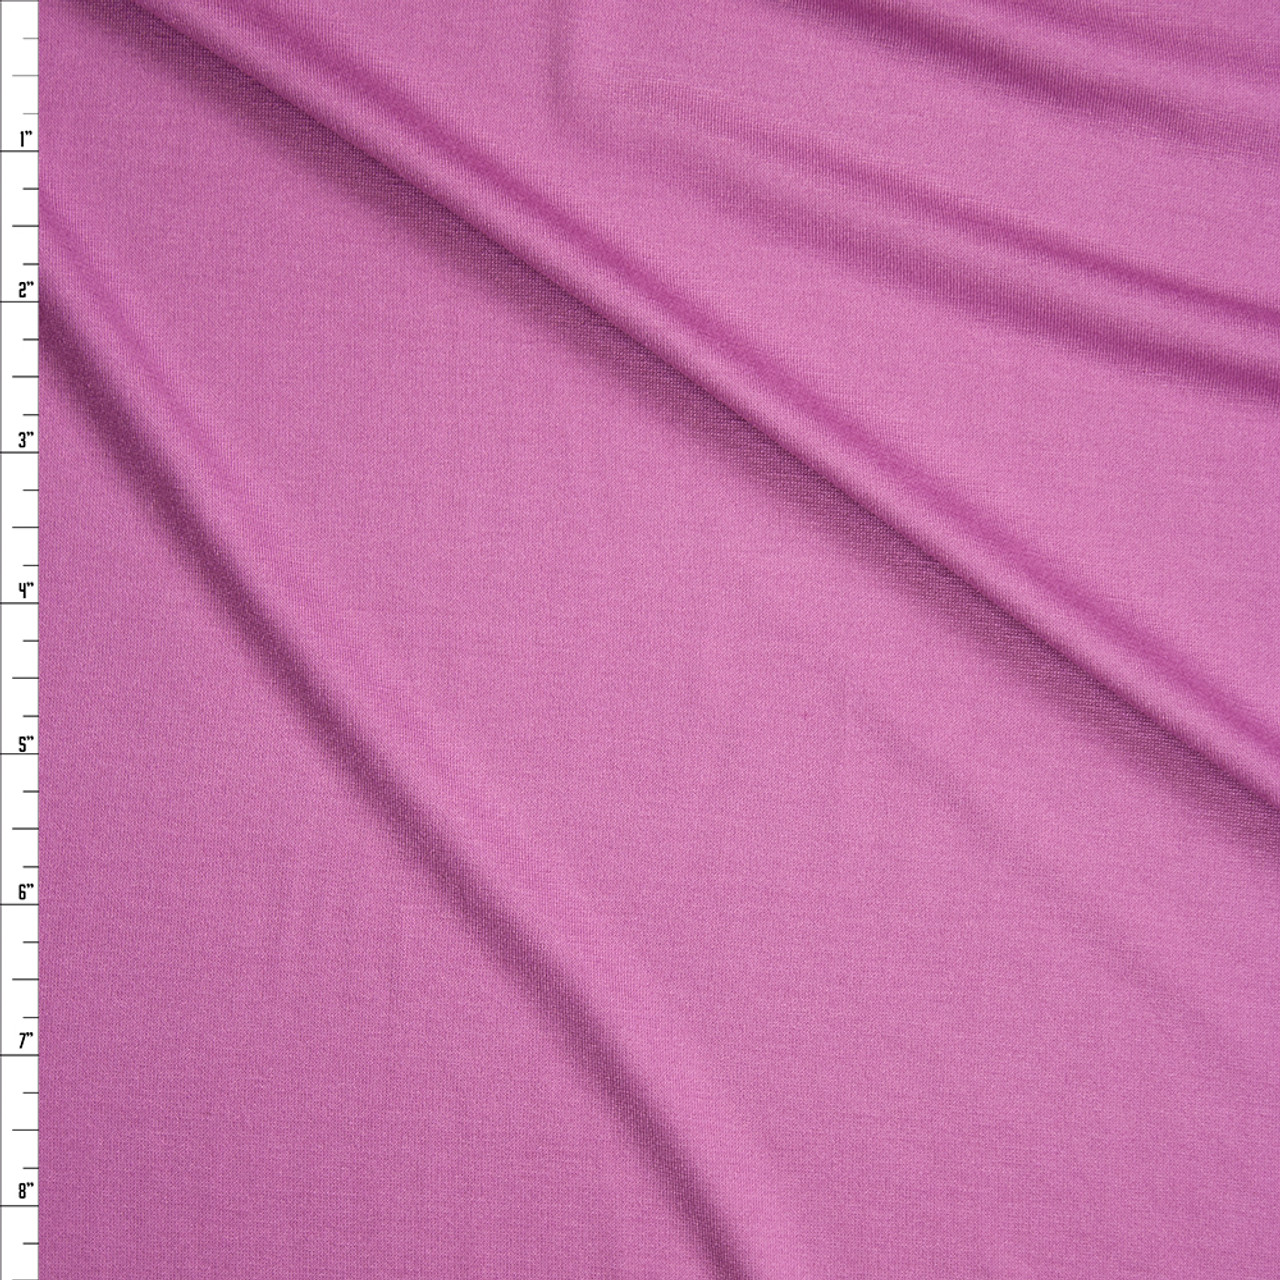 Cali Fabrics Orchid Stretch Modal Jersey Knit Fabric by the Yard